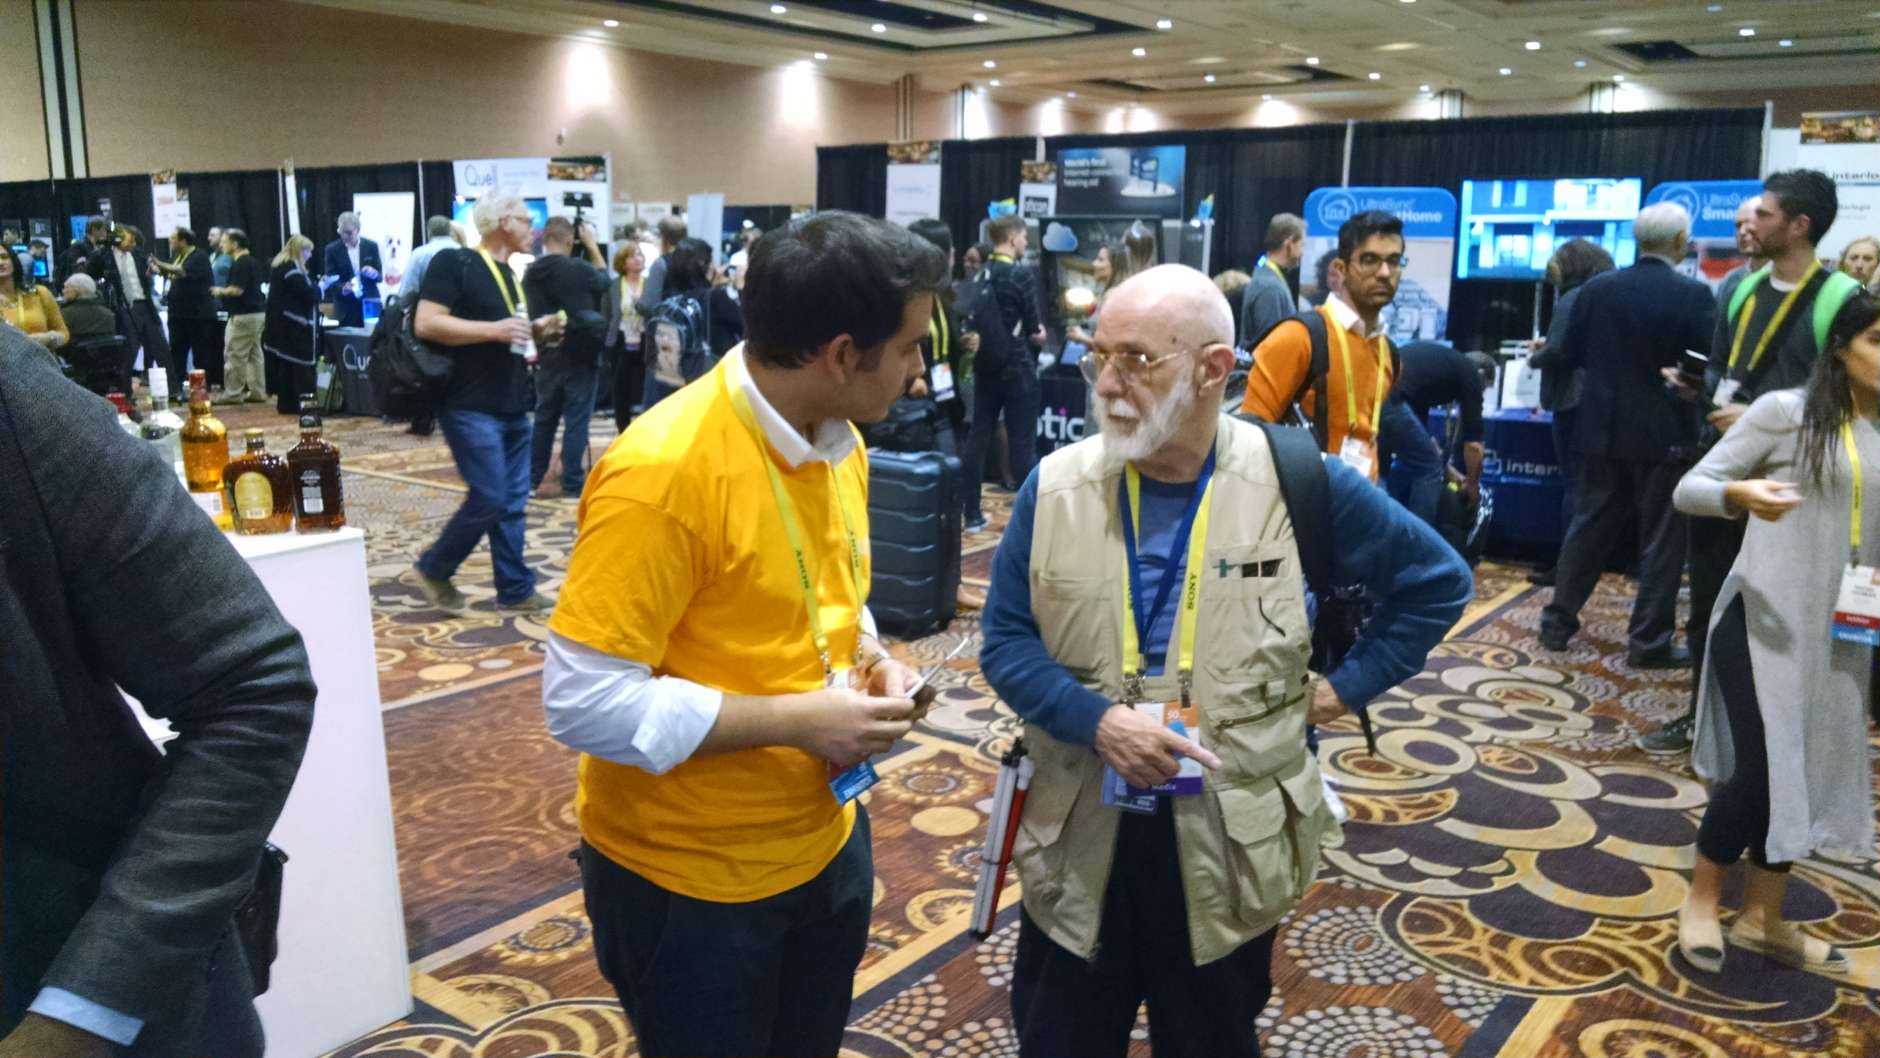 A Yummi Robotics representative visits with an attendee during "CES Unveiled." (WTOP/Steve Winter)